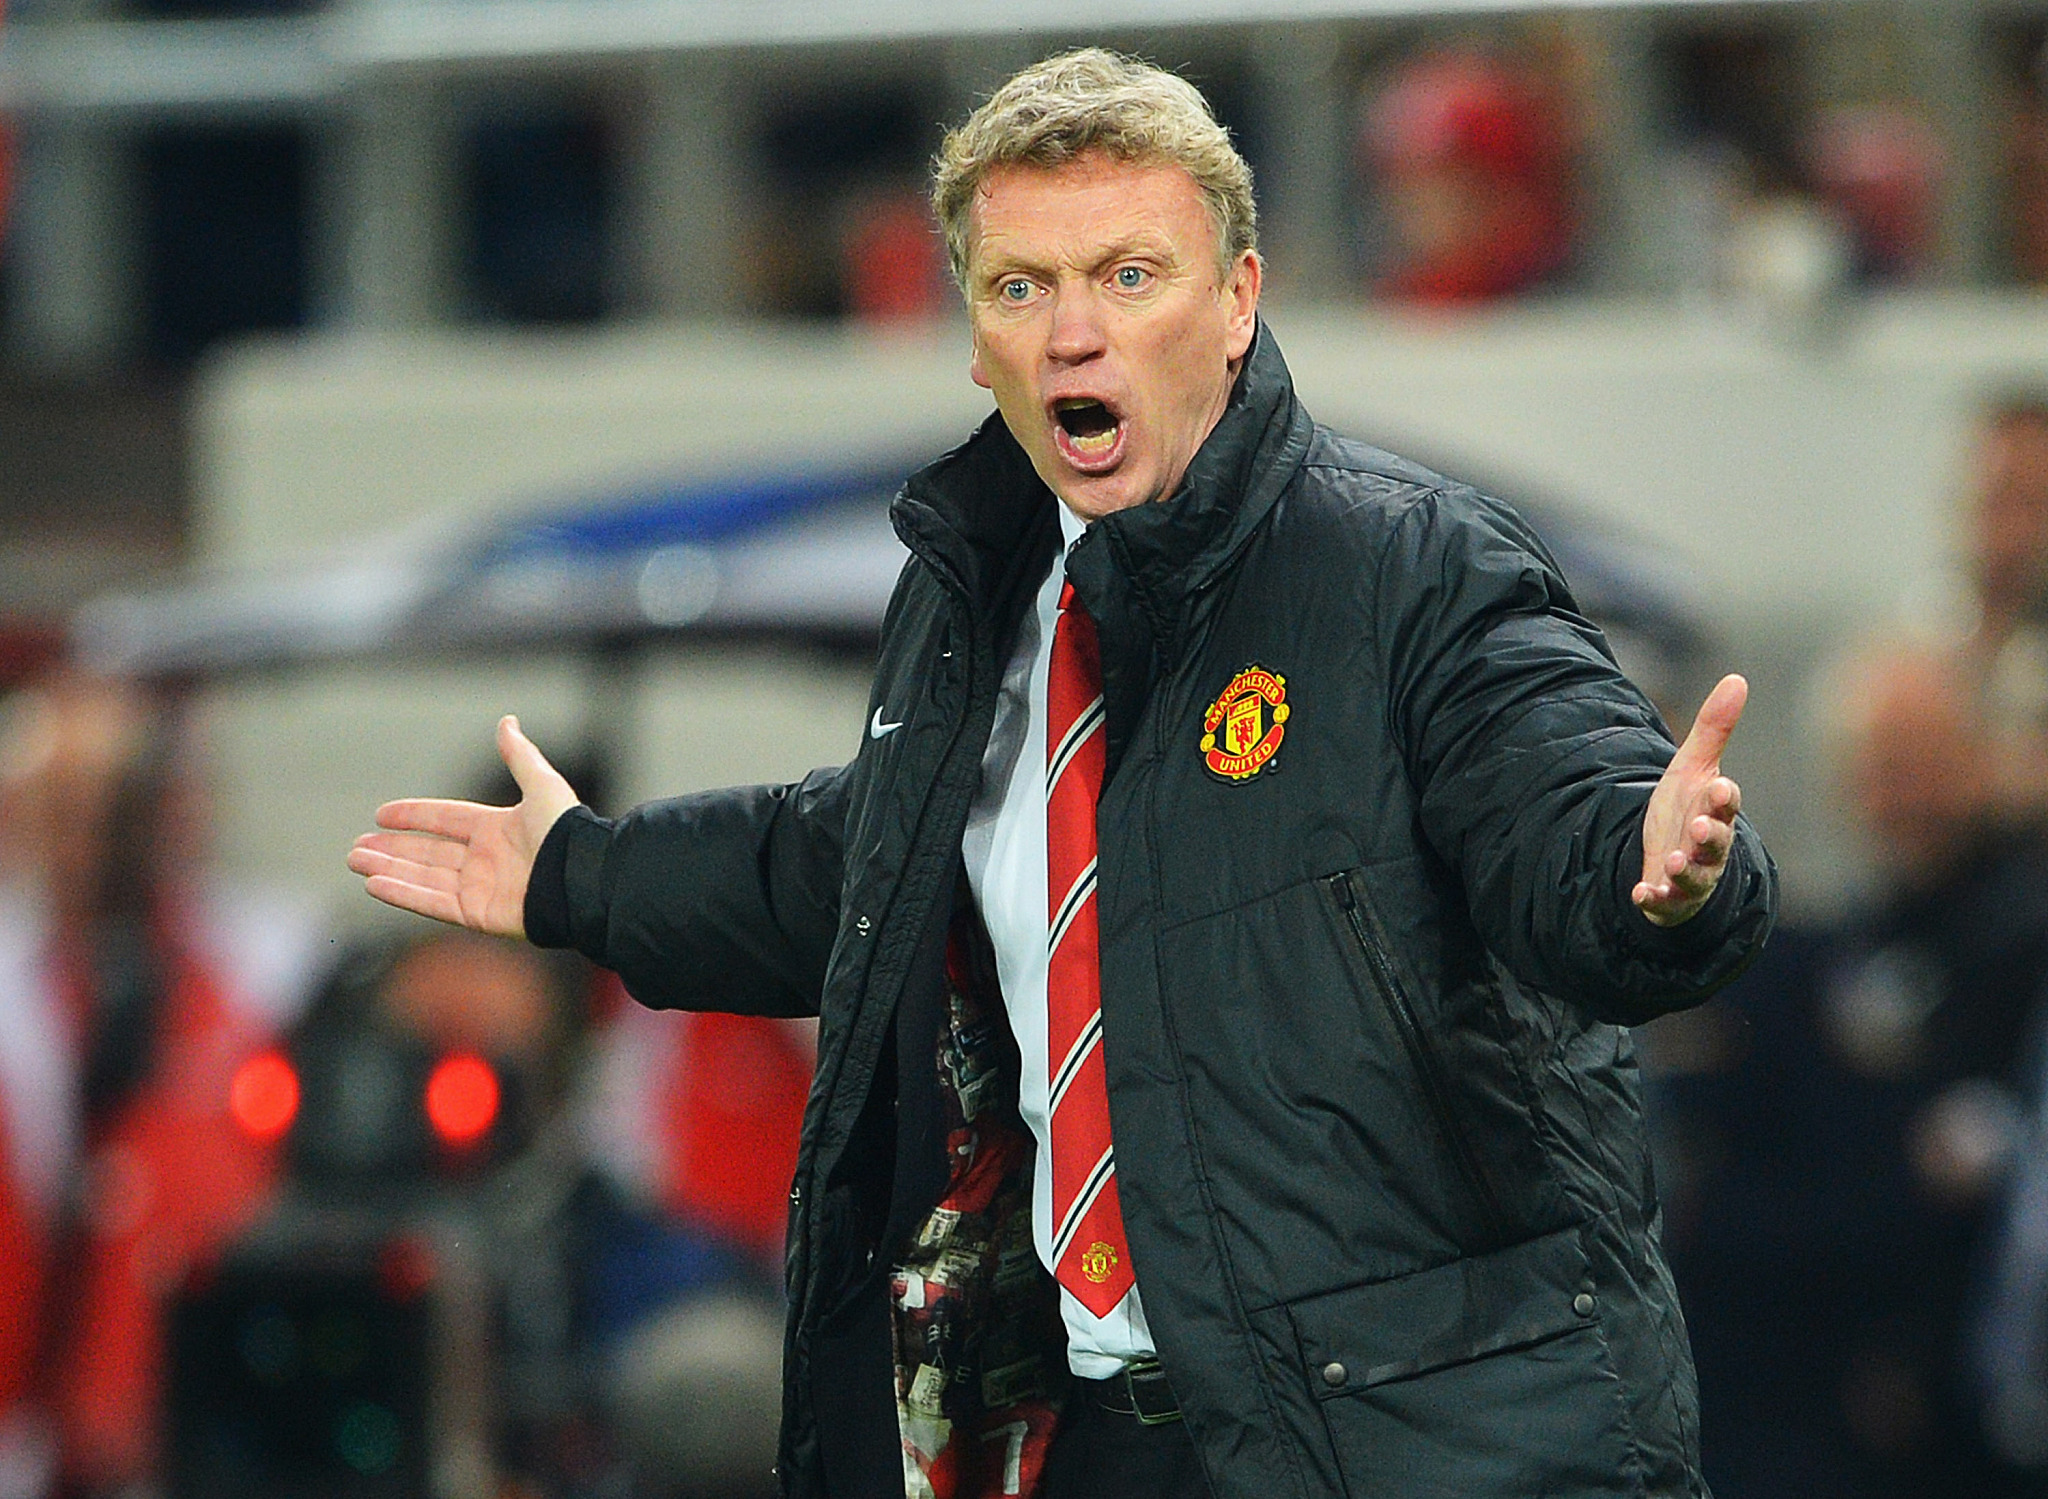 David Moyes had a miserable spell at Manchester United. /CFP